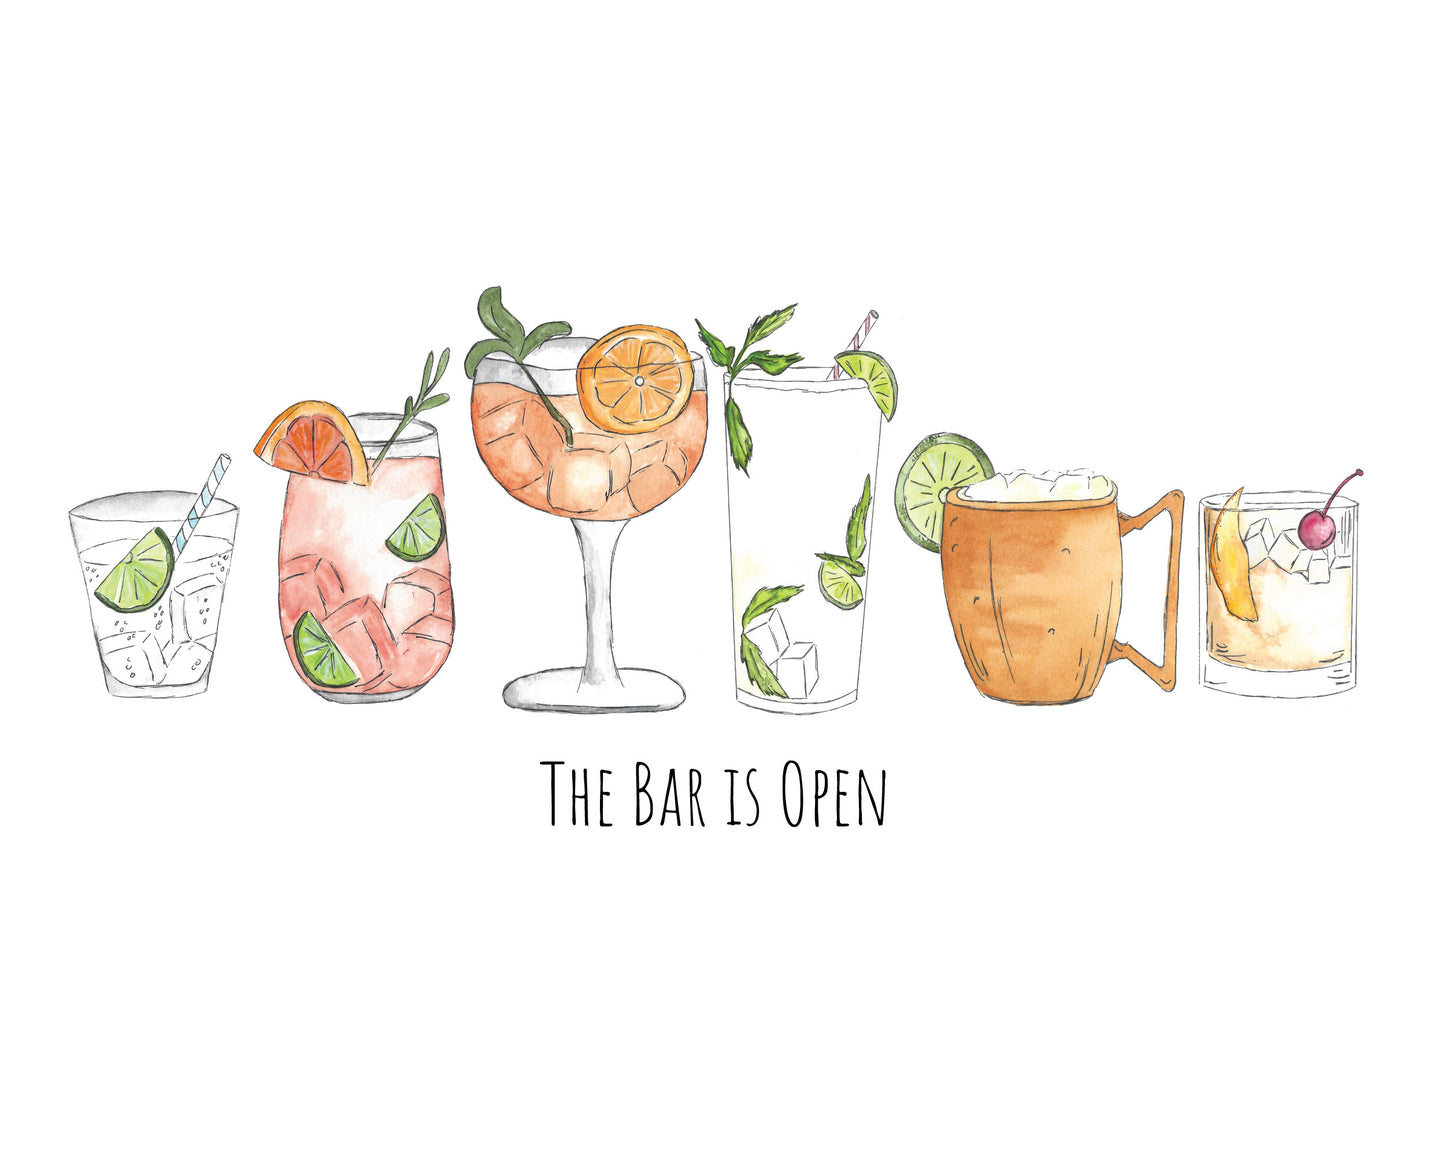 Art Print of a watercolor painting by Michigan artist Abigail Powers.  This line up of drinks is great print for a bar area or kitchen. The drinks are colorful and fun! The print reads “The Bar is Open.”